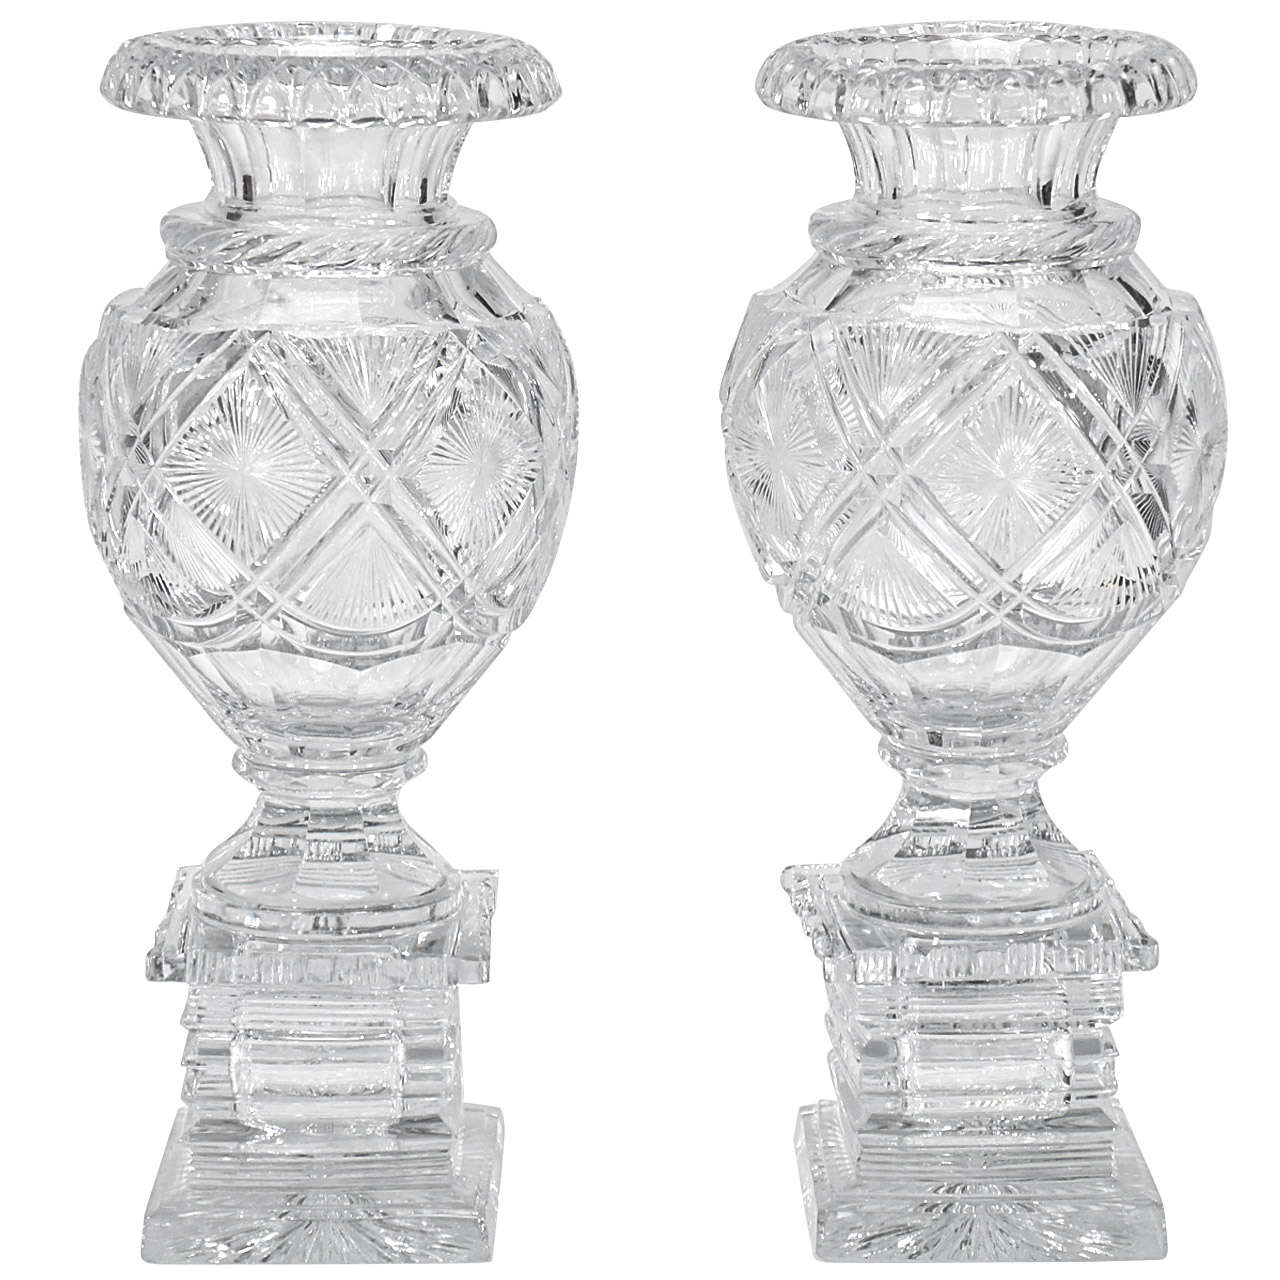 Pair of 19th C. Anglo-Irish Cut Crystal Mantle Vases W/ Square Bases For Sale